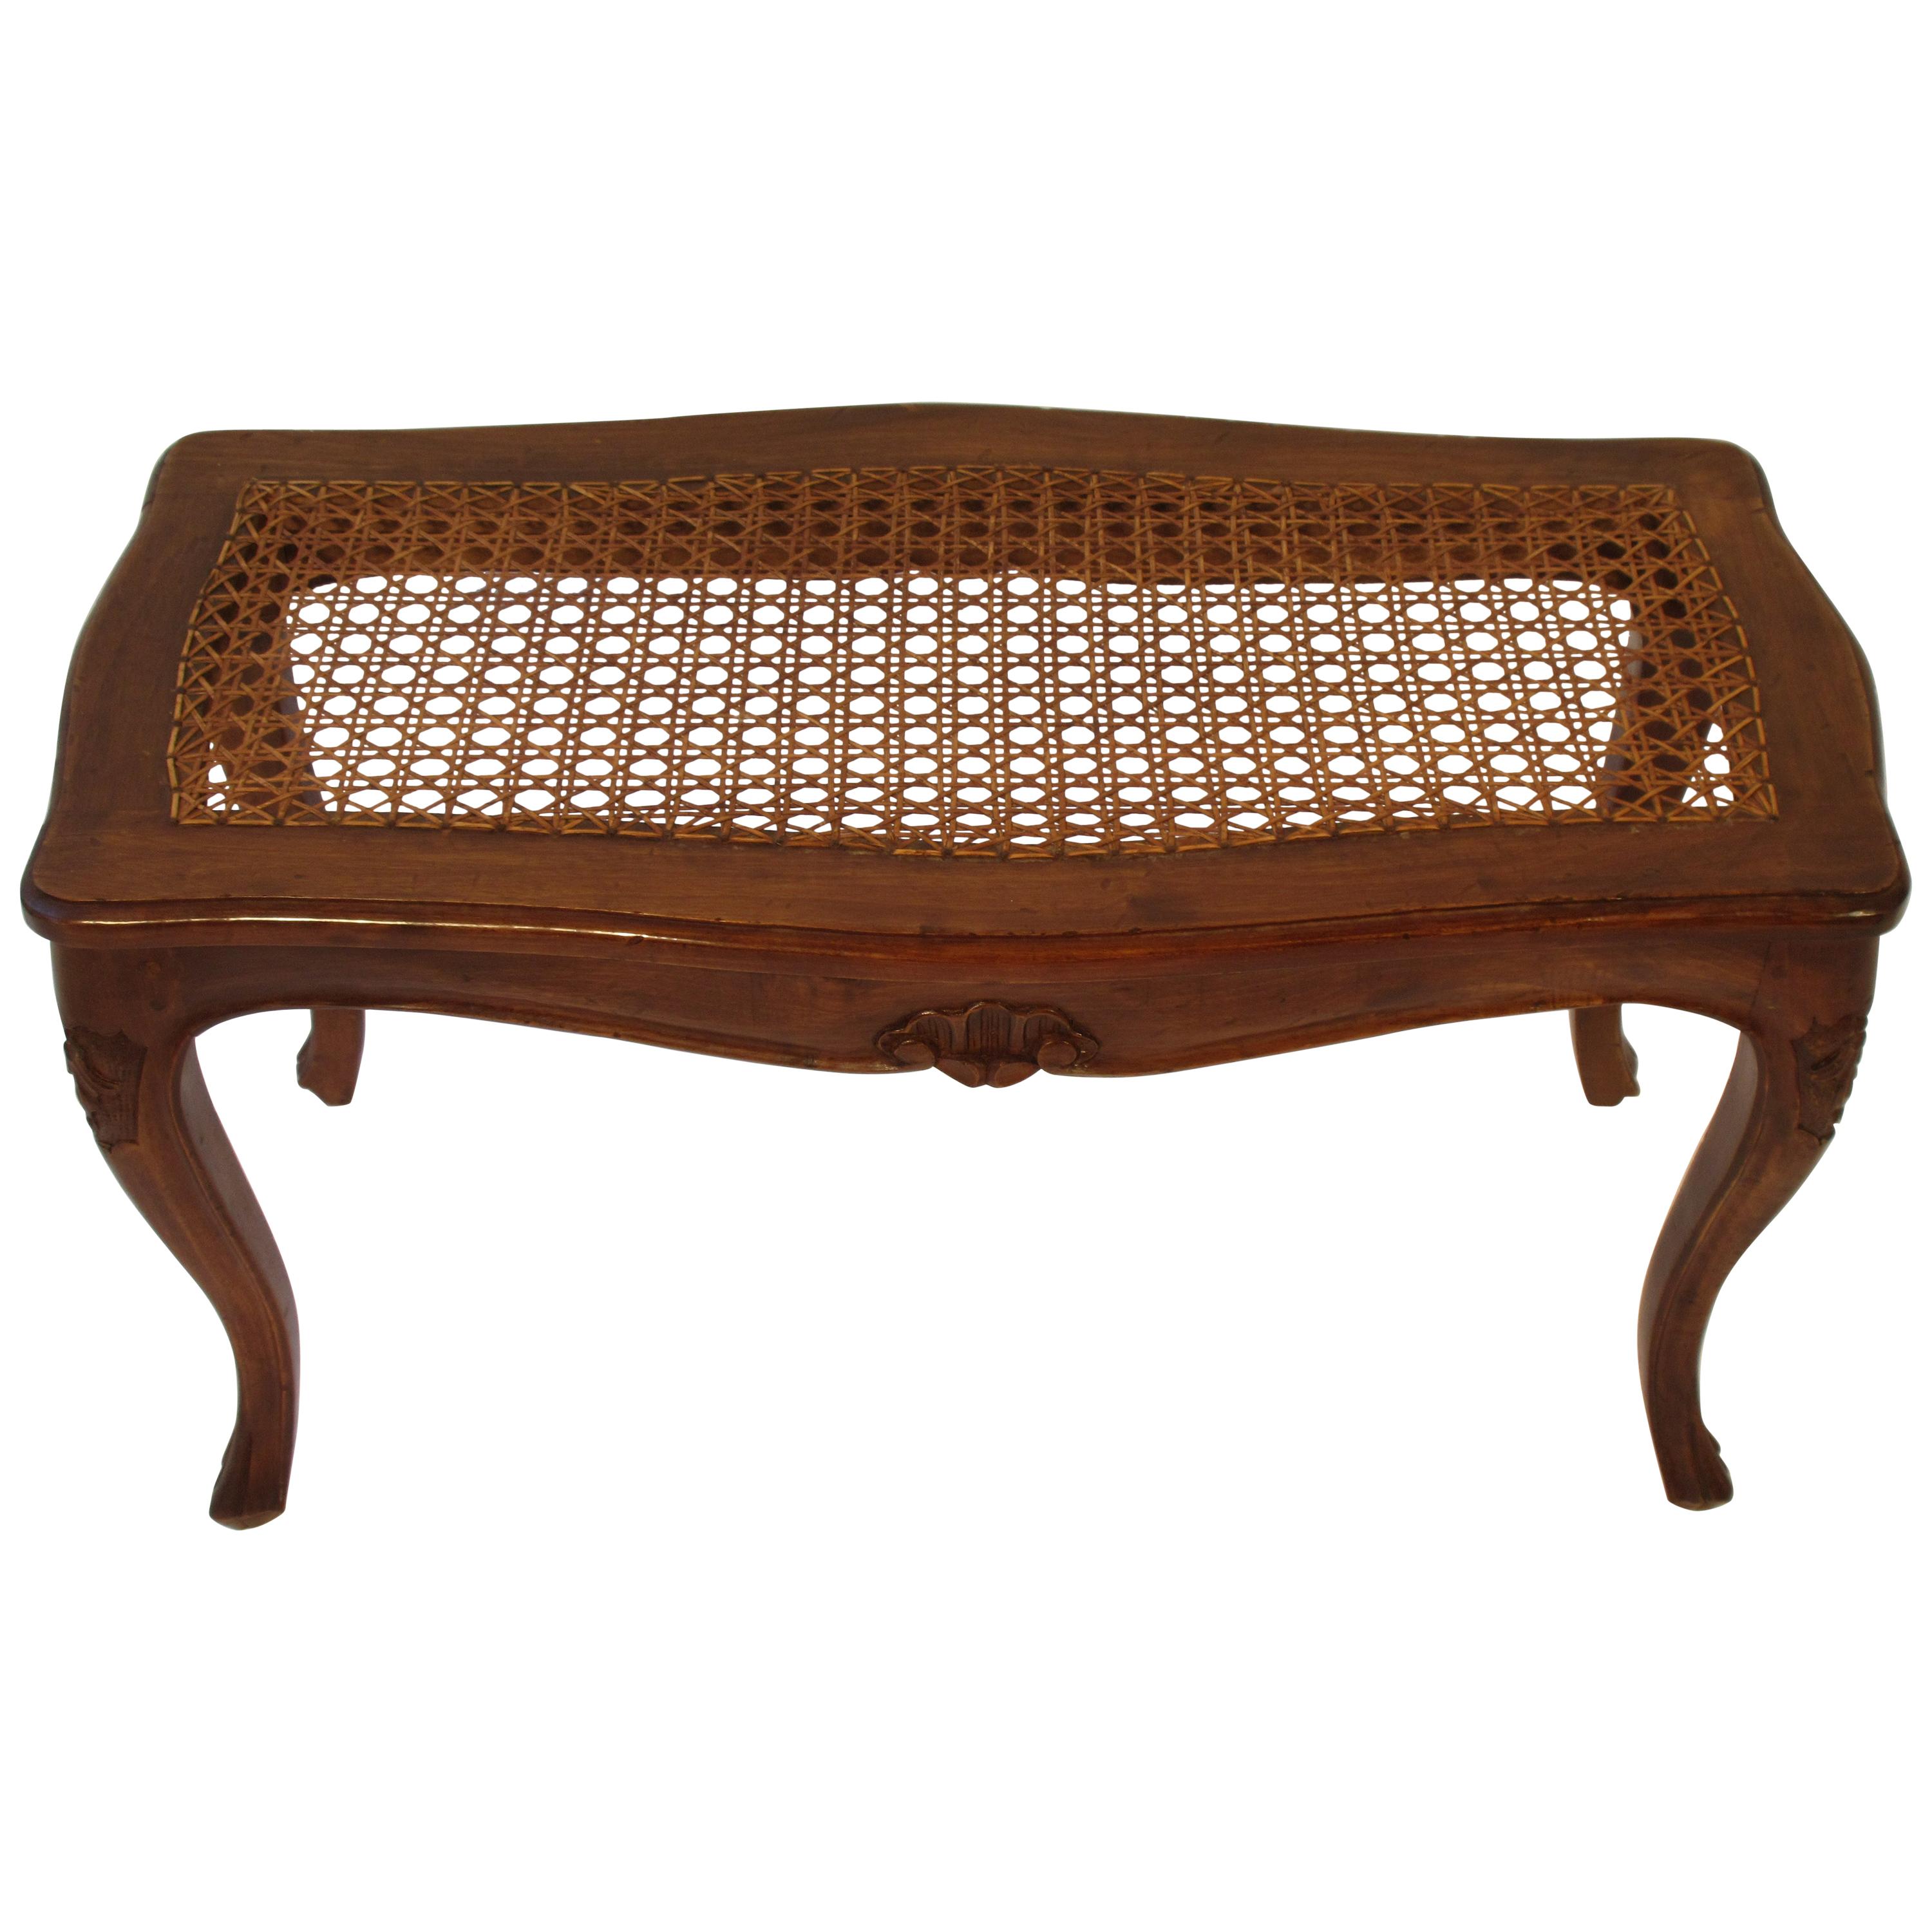 1950s Carved Wood Caned Seated Bench